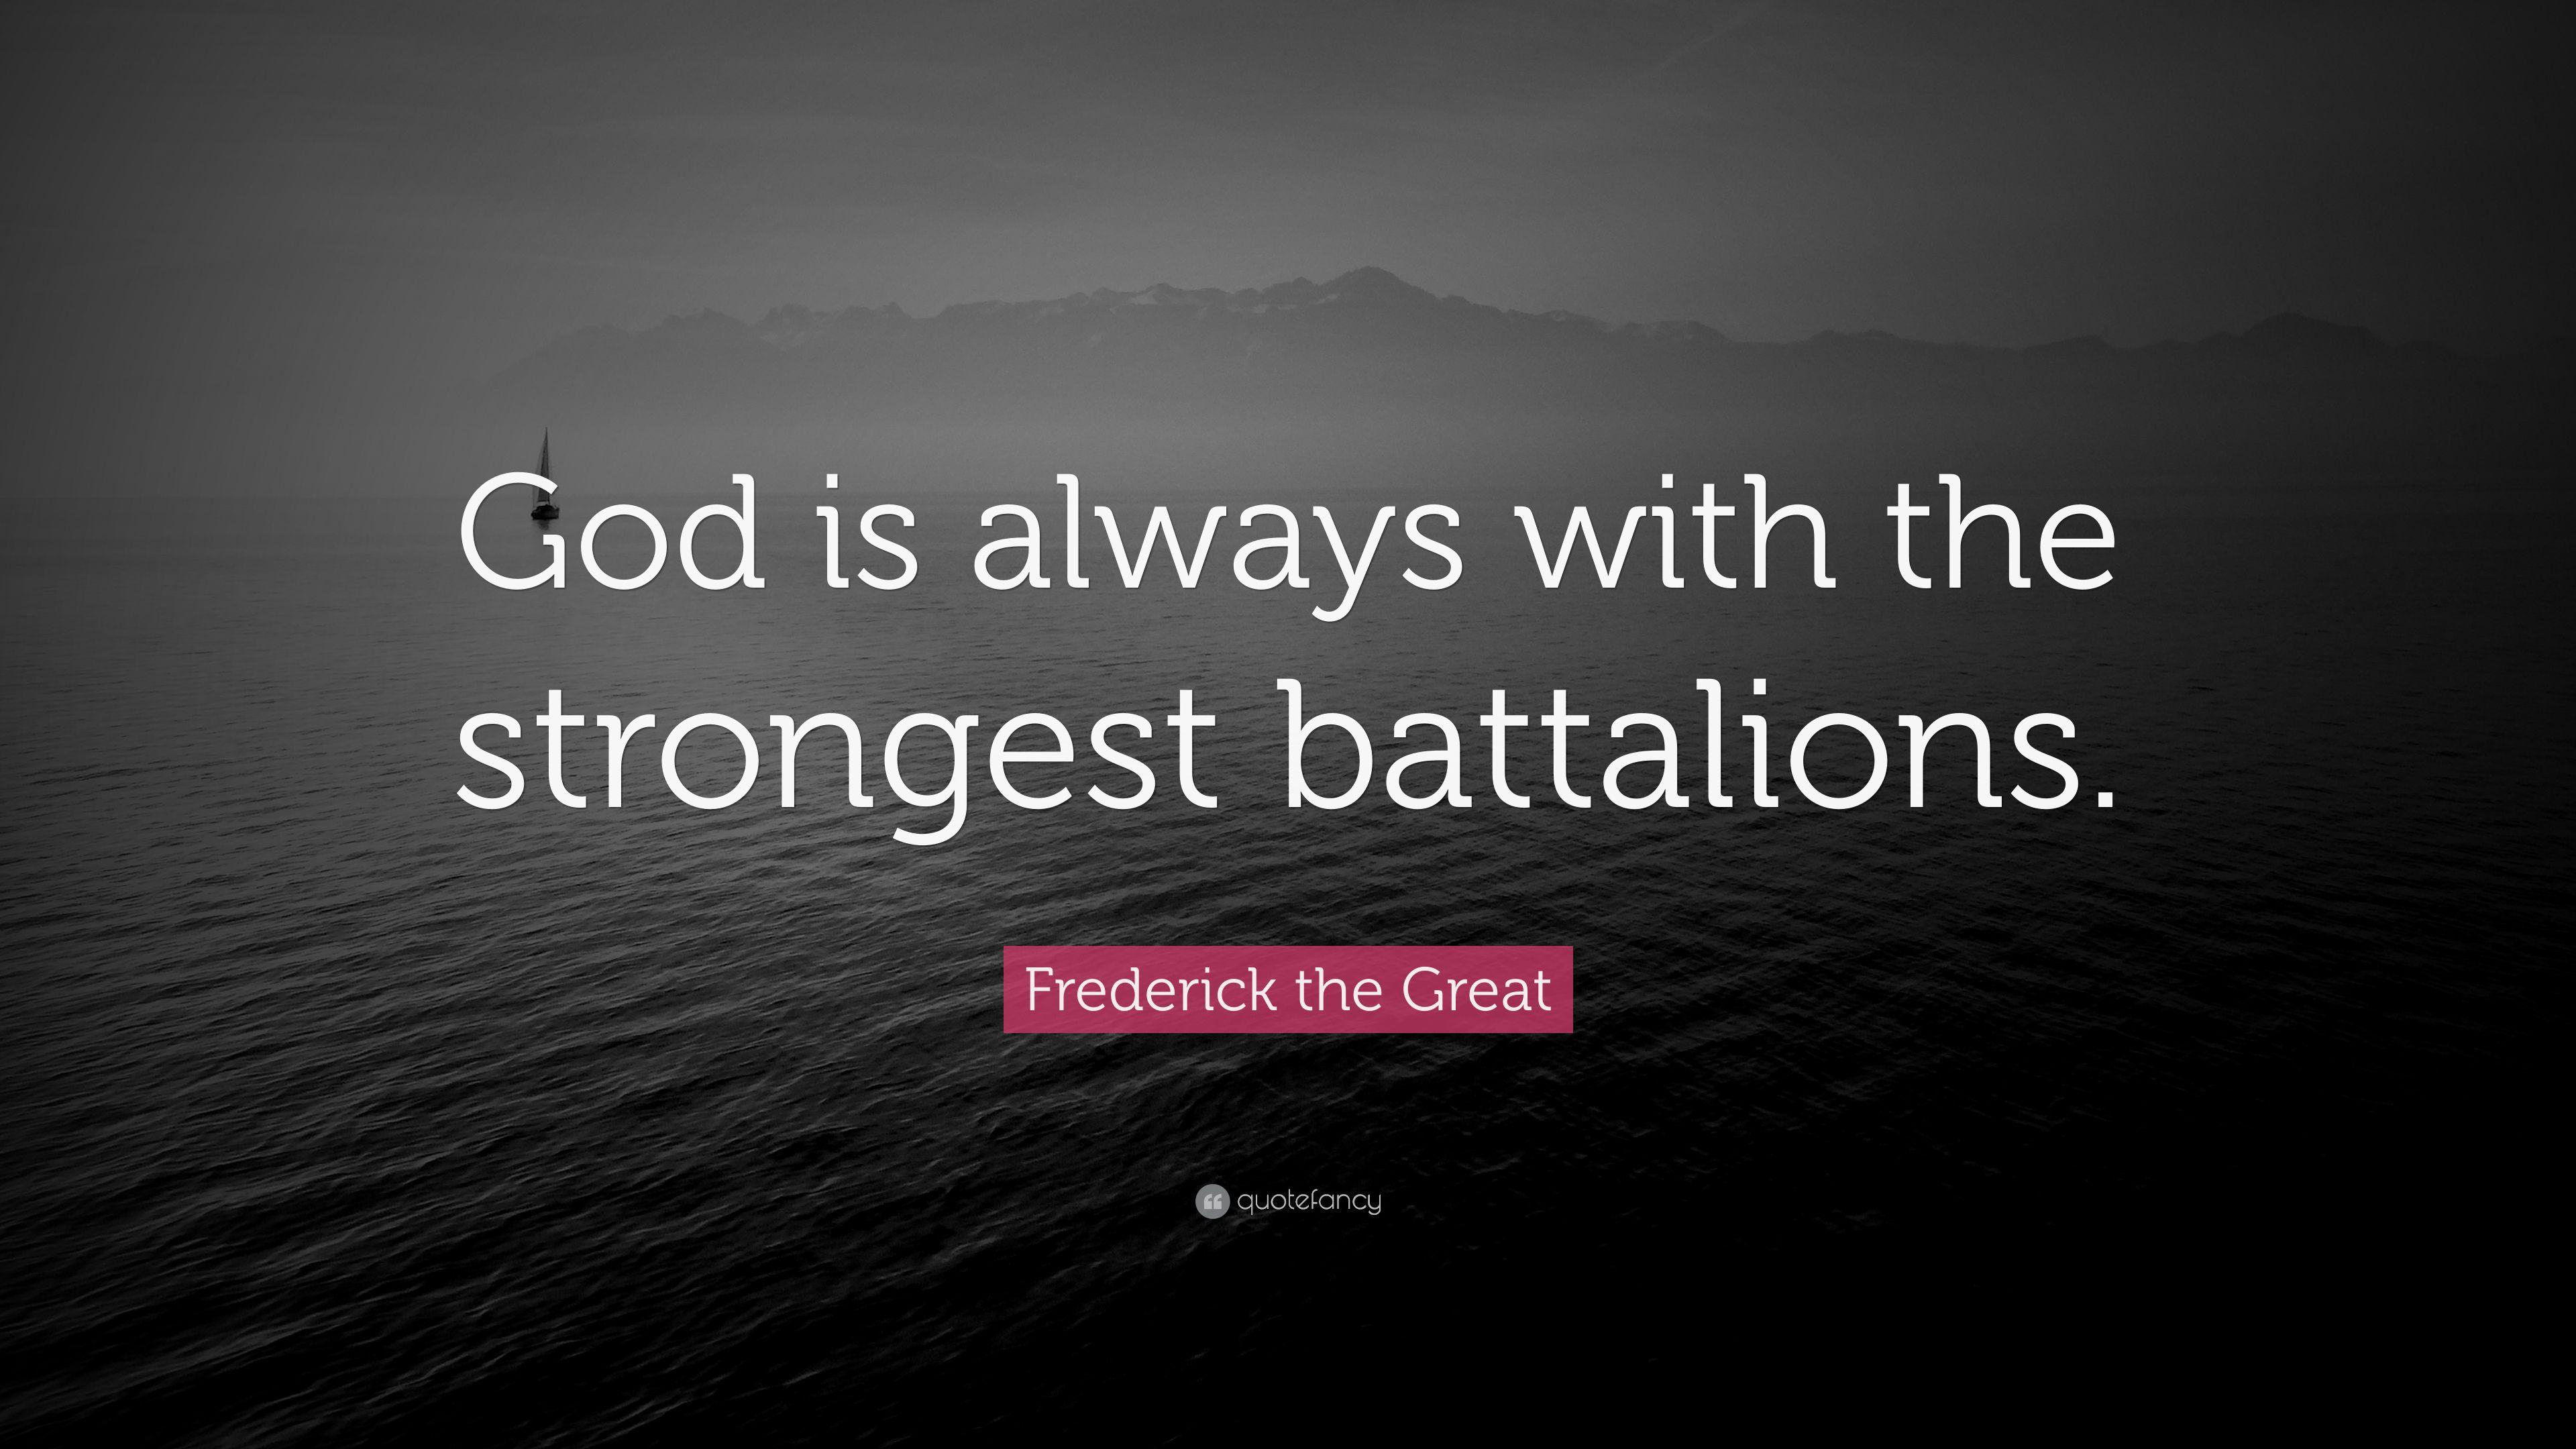 Frederick the Great Quote: “God is always with the strongest